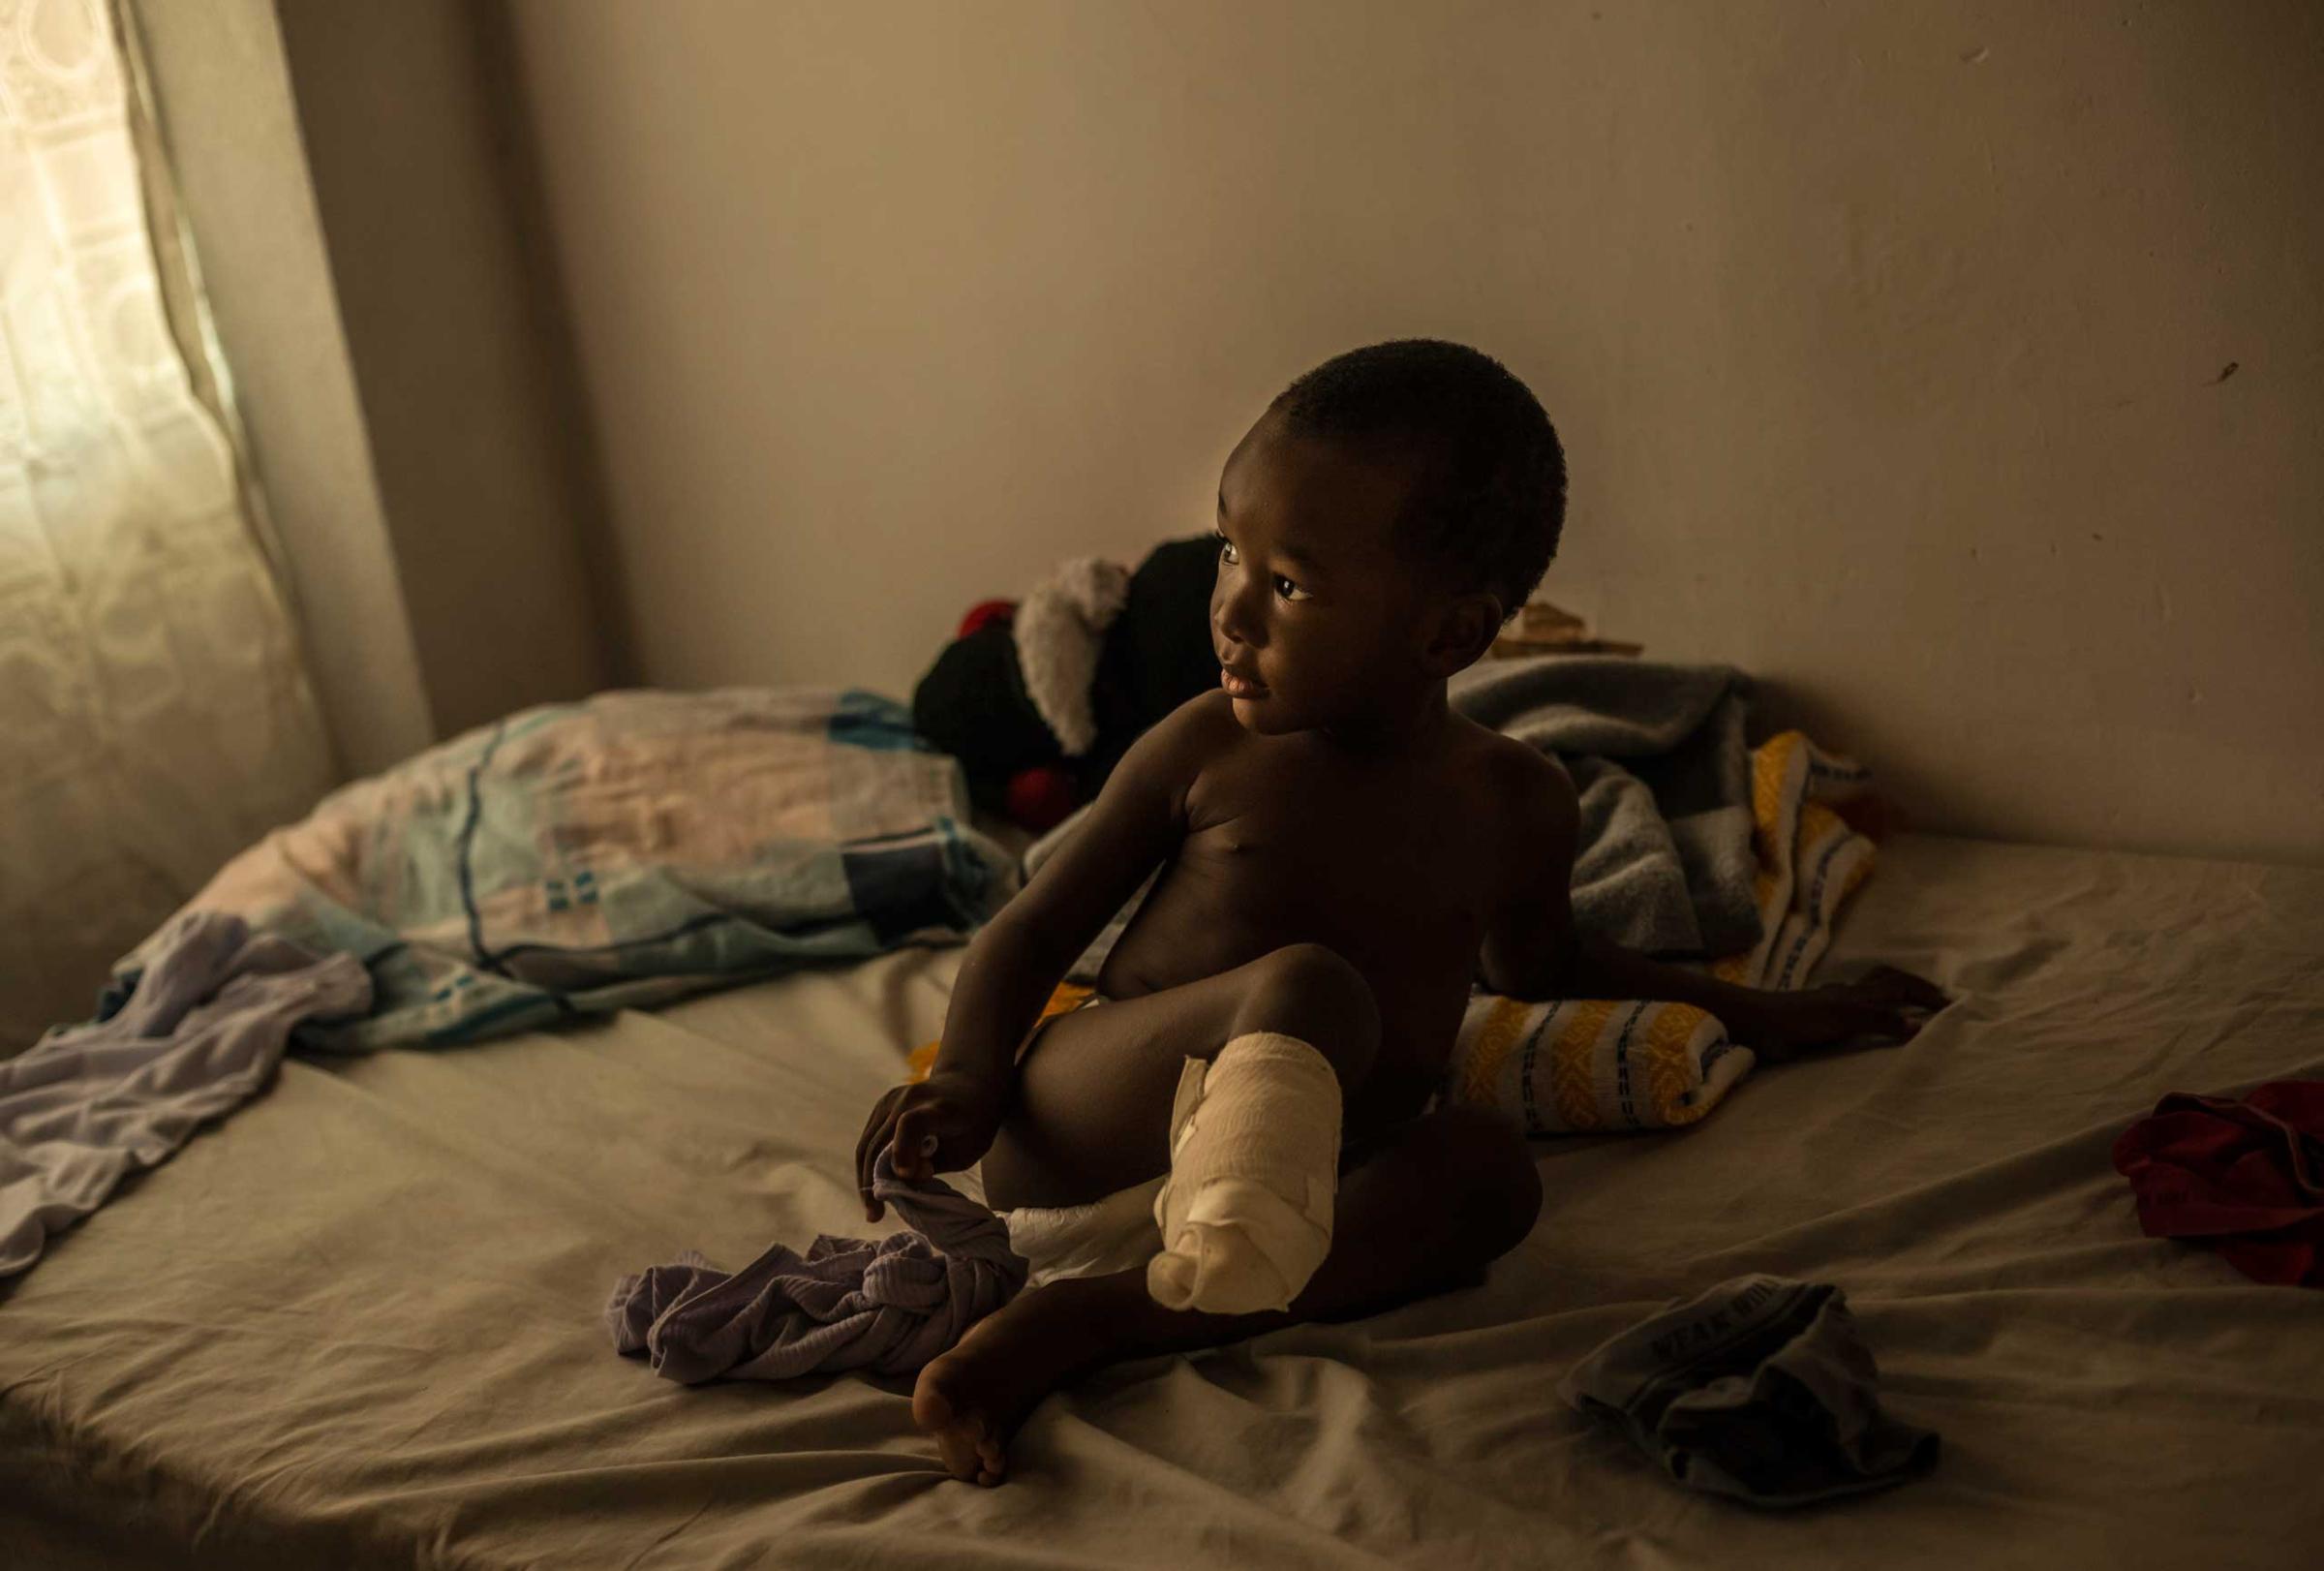 Richard, 2, who had to have his leg partially amputated after falling from a train, waits for a bath from his mother, Emily Bermudez, in Ixtepec, Mexico, July 7, 2014